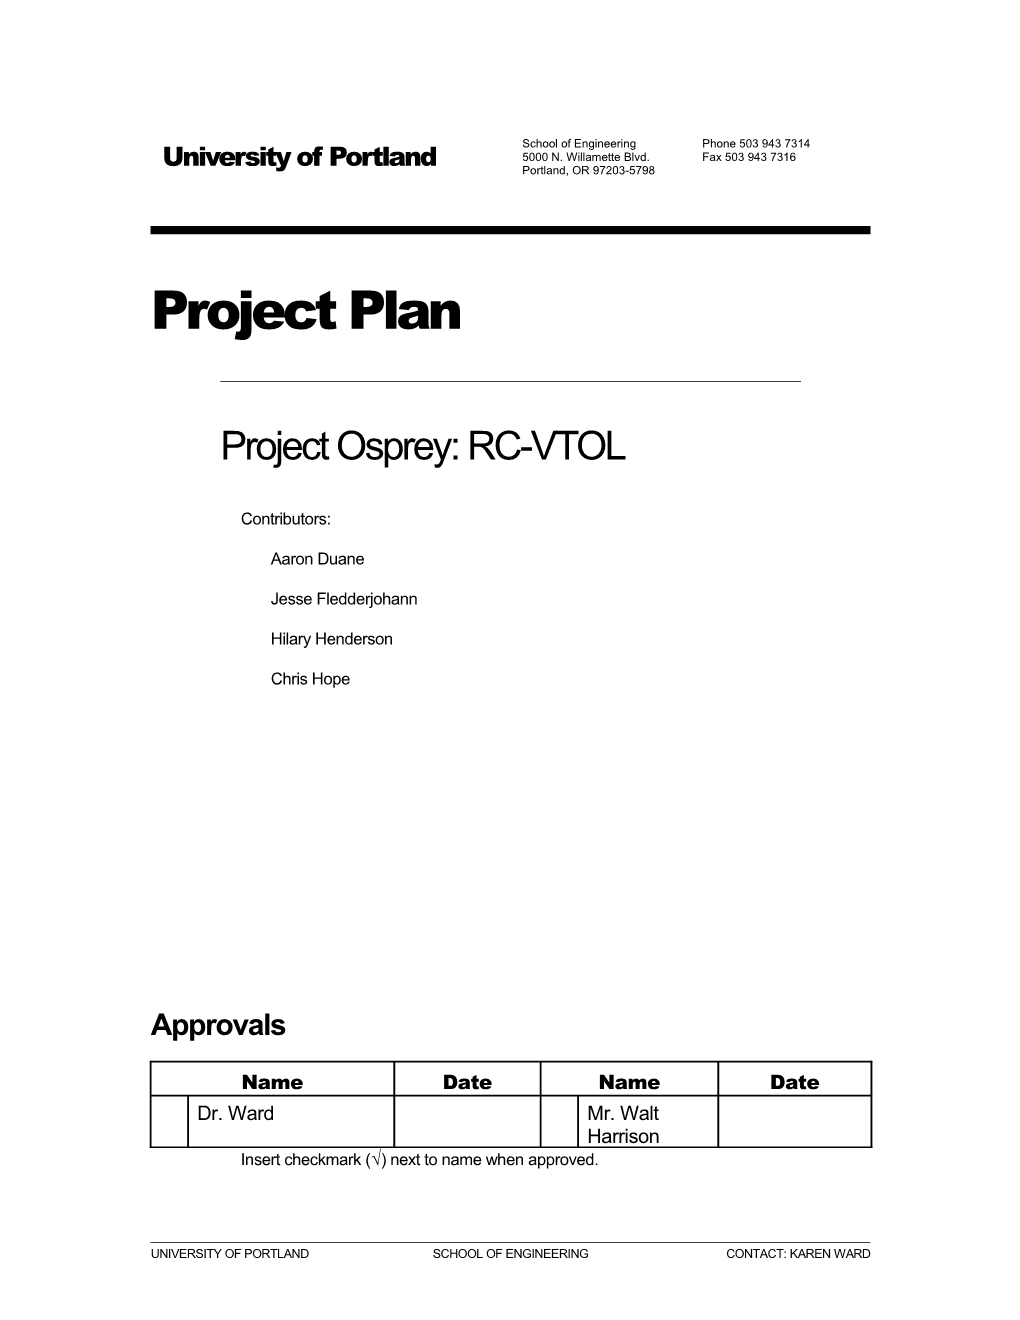 Project Plan Rev. 0.1 Page 2